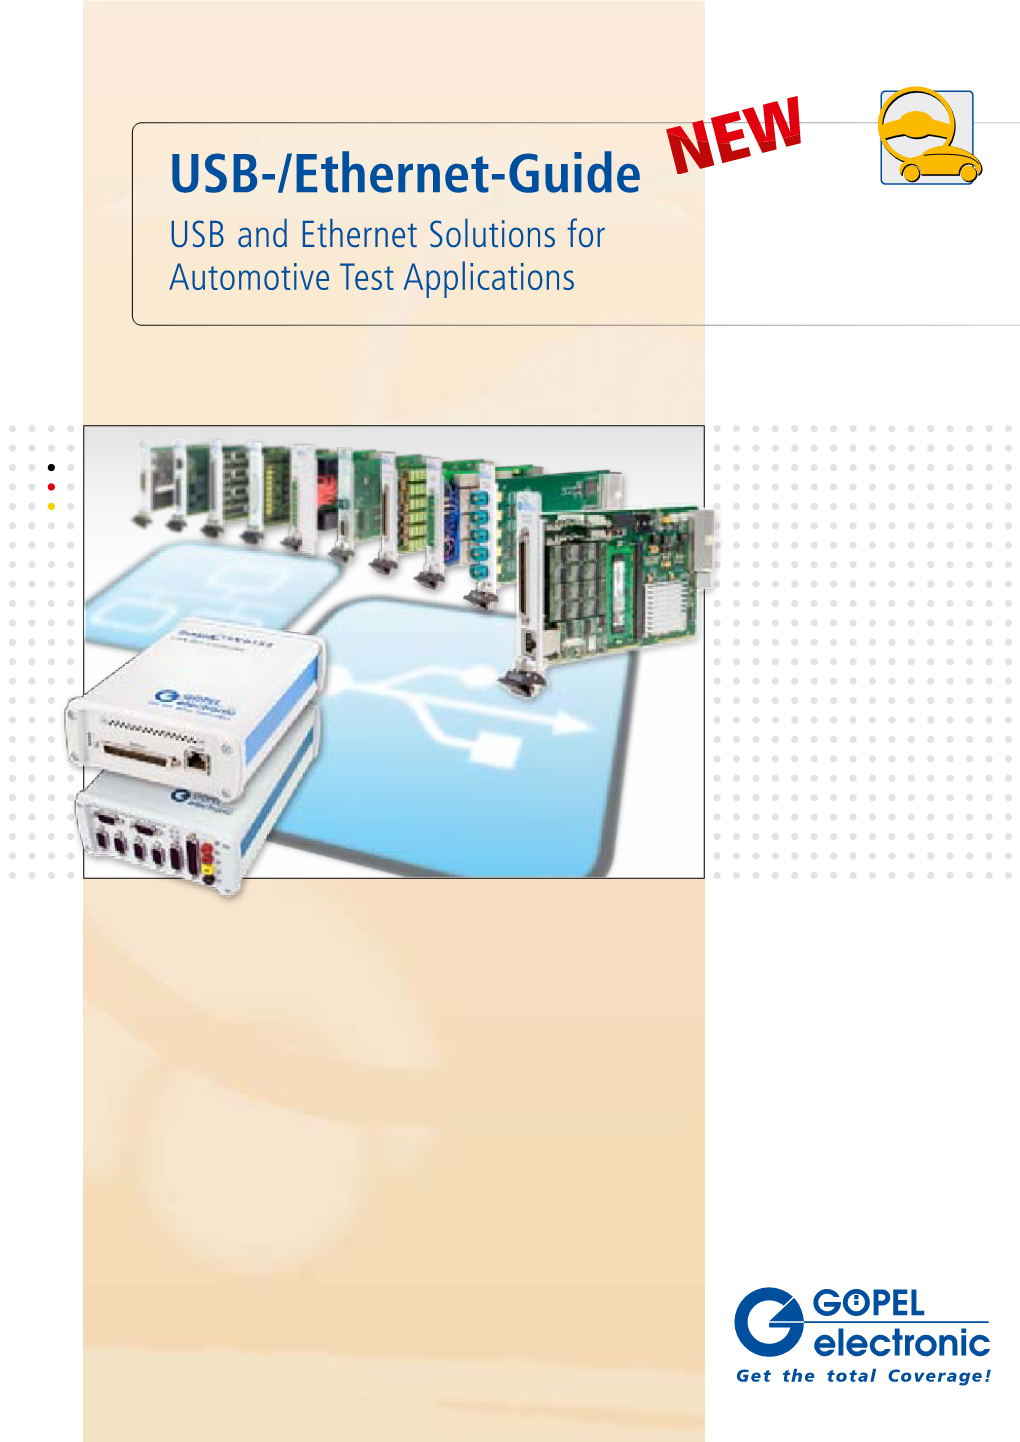 USB-/Ethernet-Guide USB and Ethernet Solutions for Automotive Test Applications